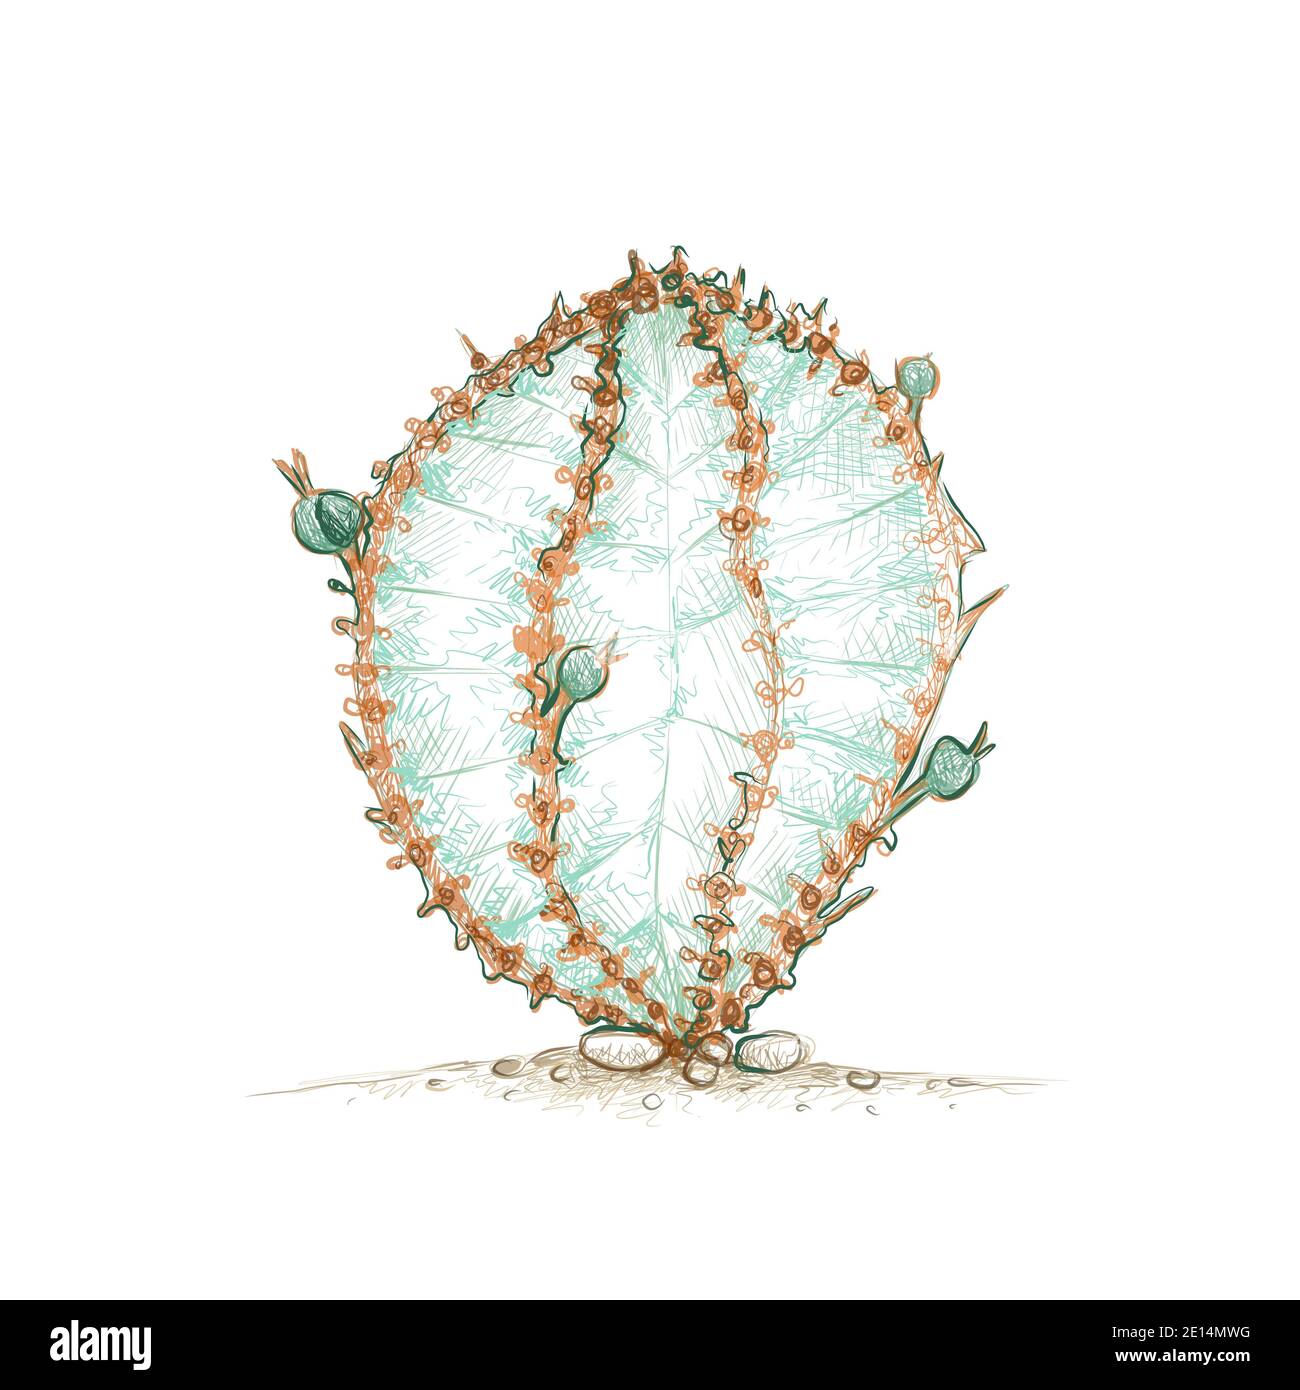 Illustration Hand Drawn Sketch of Euphorbia Polygona, African Milk Barrel or Snowflake Cactus Plant. A Succulent Plants with Sharp Thorns for Garden D Stock Photo